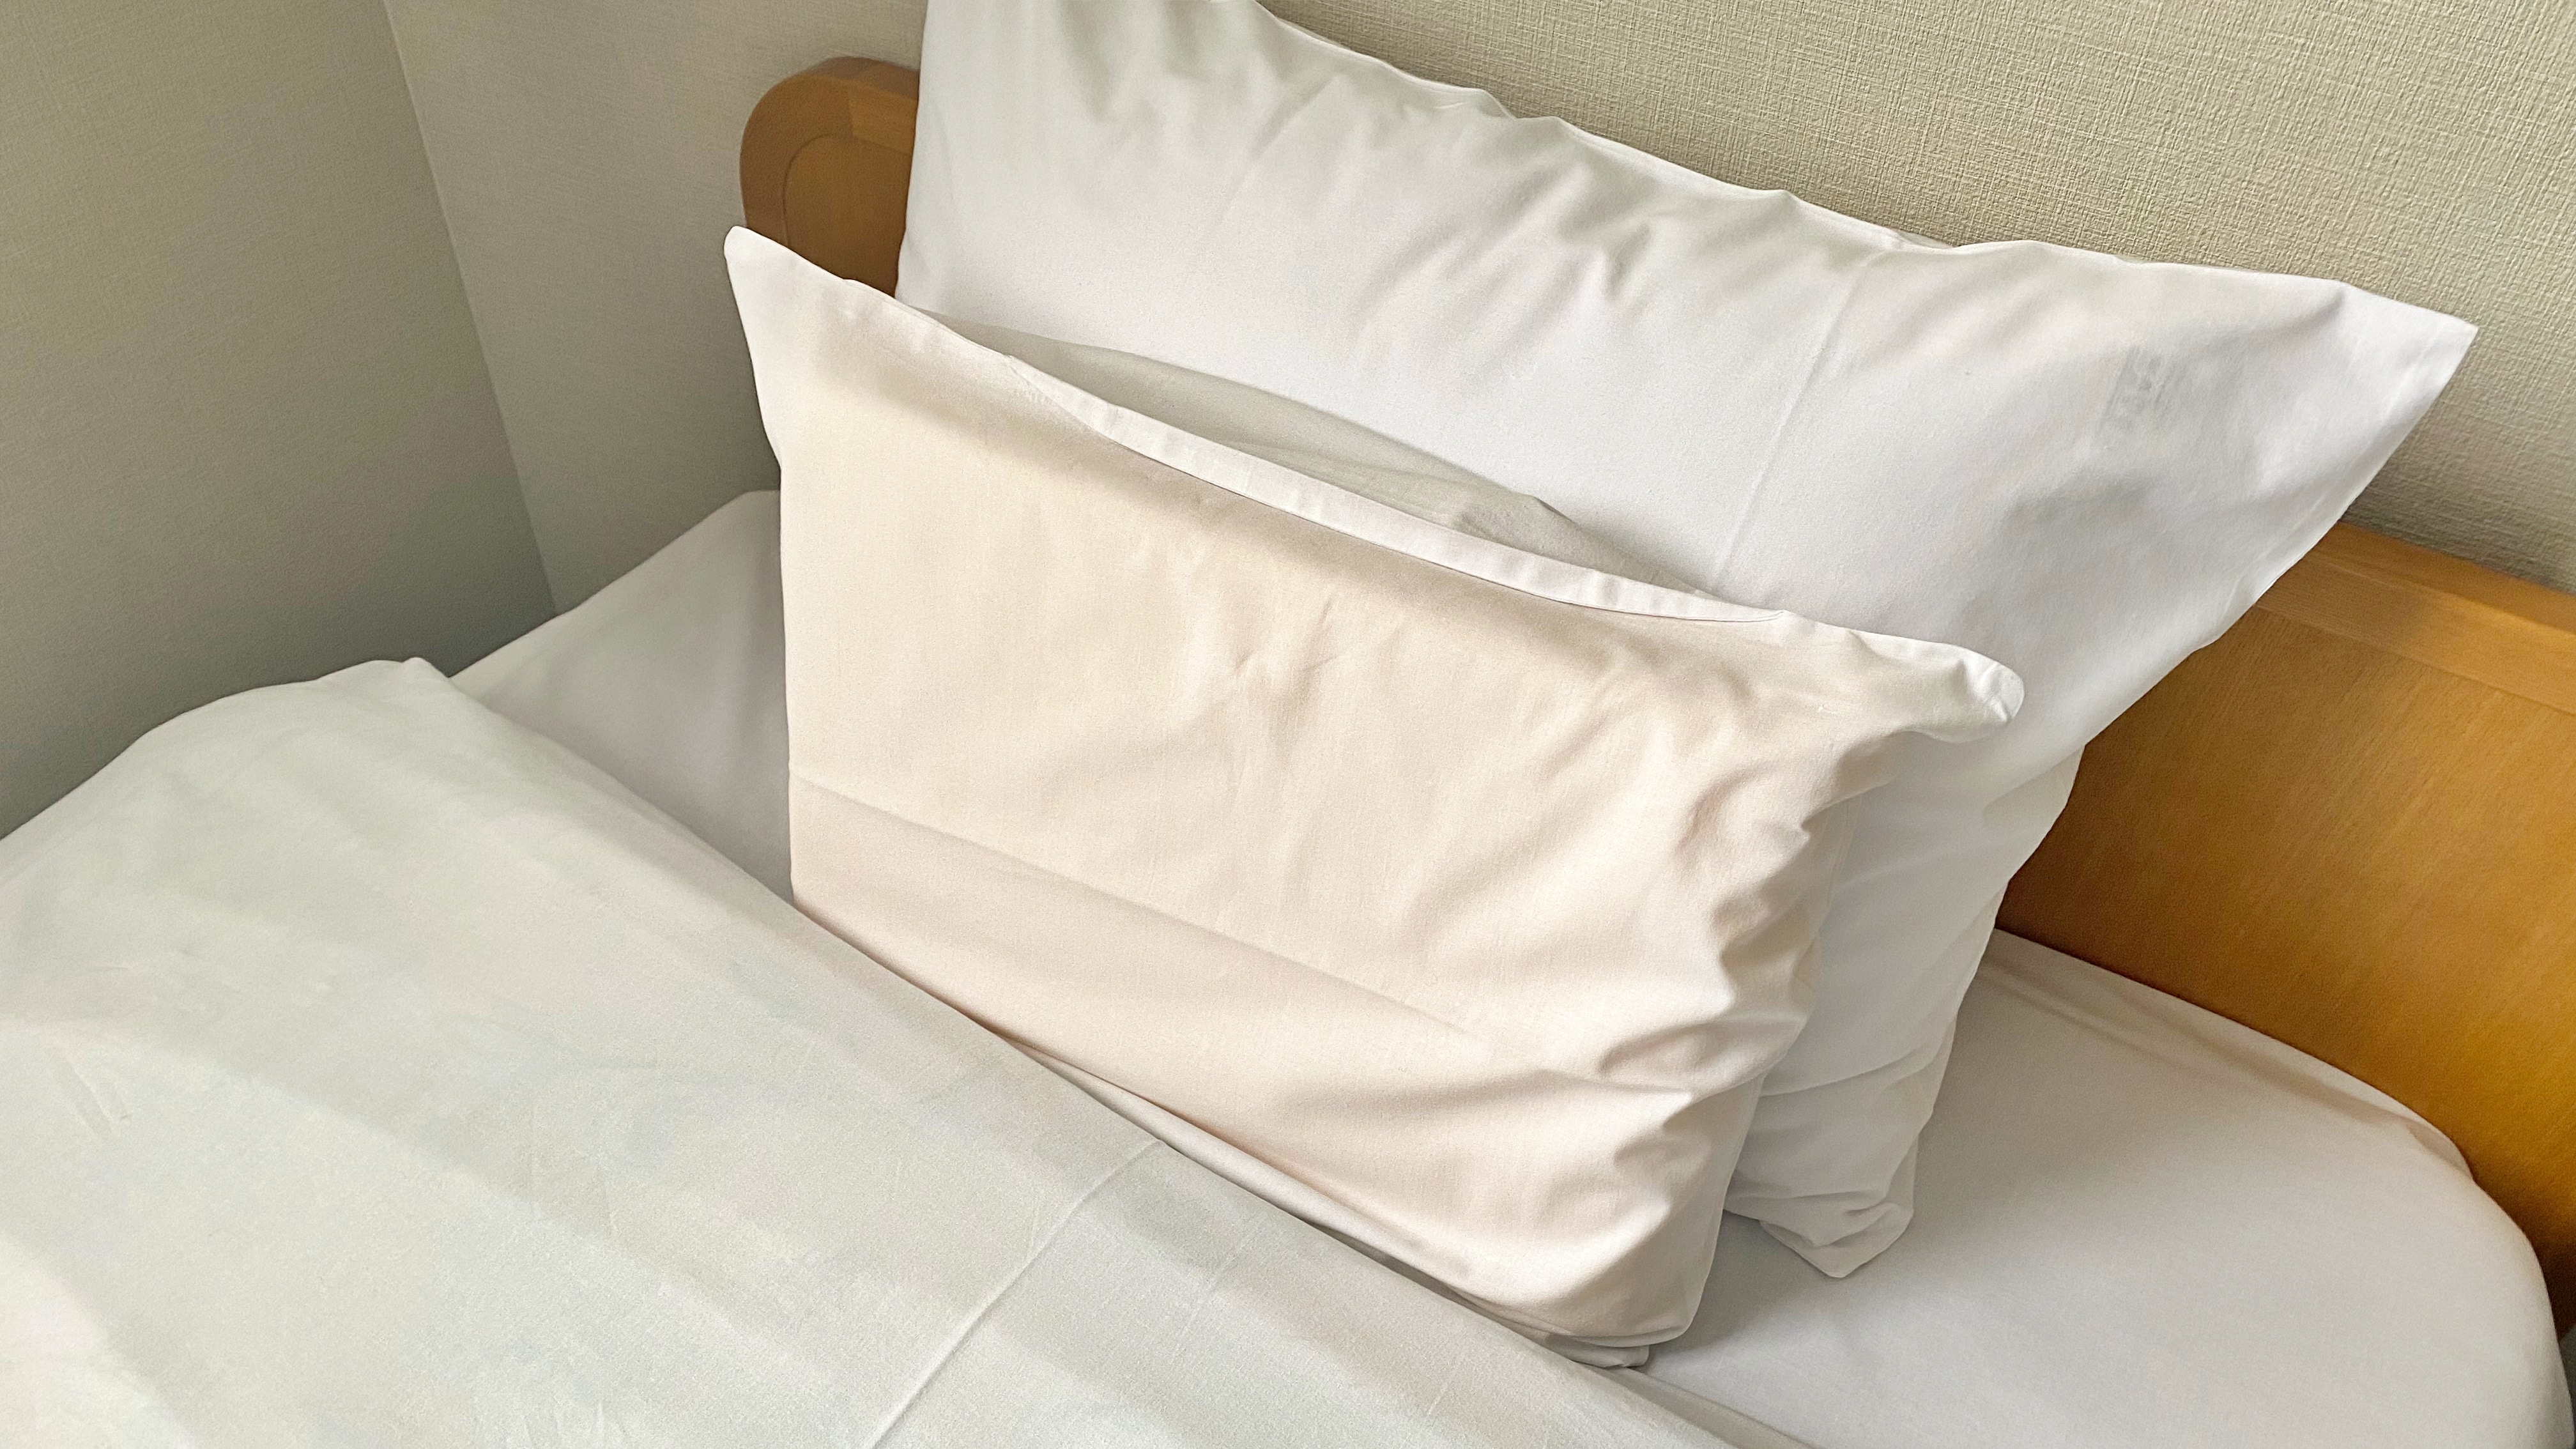 [Good sleep room] Pillows also use low resilience.